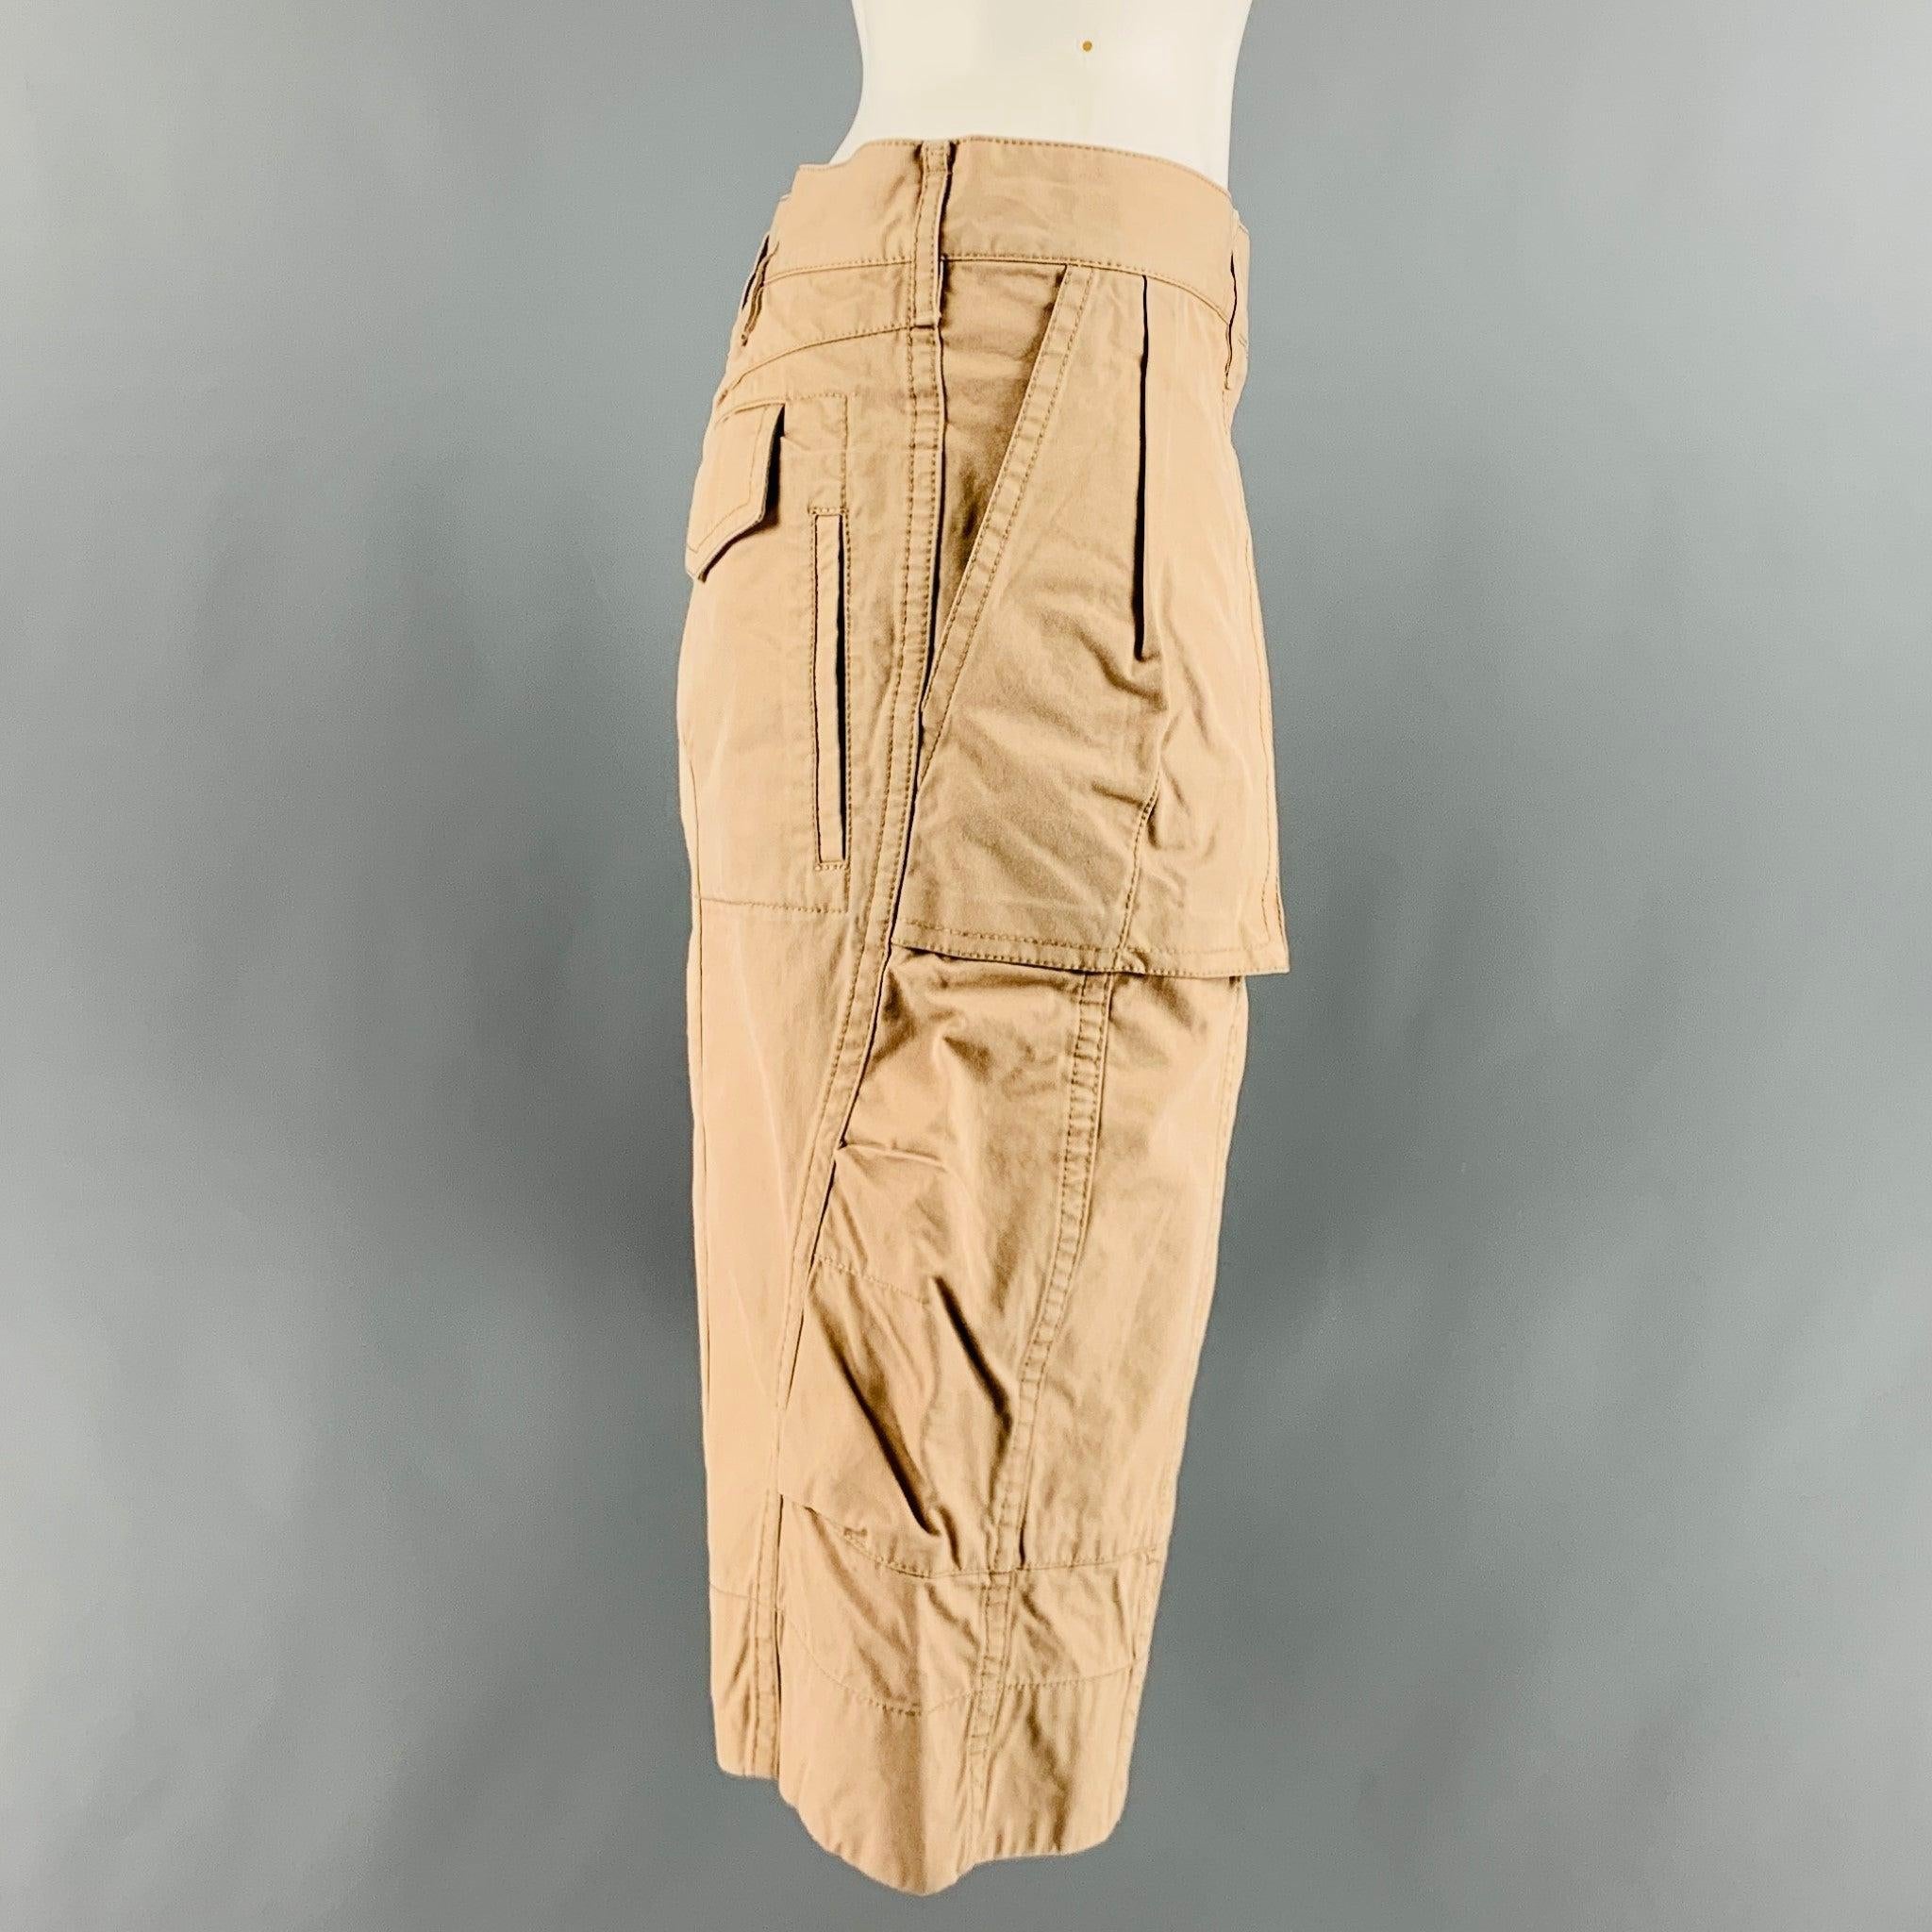 MARC JACOBS shorts comes in a beige cotton featuring an oversized utility style, slit pockets, zip fly, and a double front tab closure. Made in USA.Excellent Pre-Owned Condition. 

Marked:   10 

Measurements: 
  Waist: 37 inches Rise: 8.5 inches